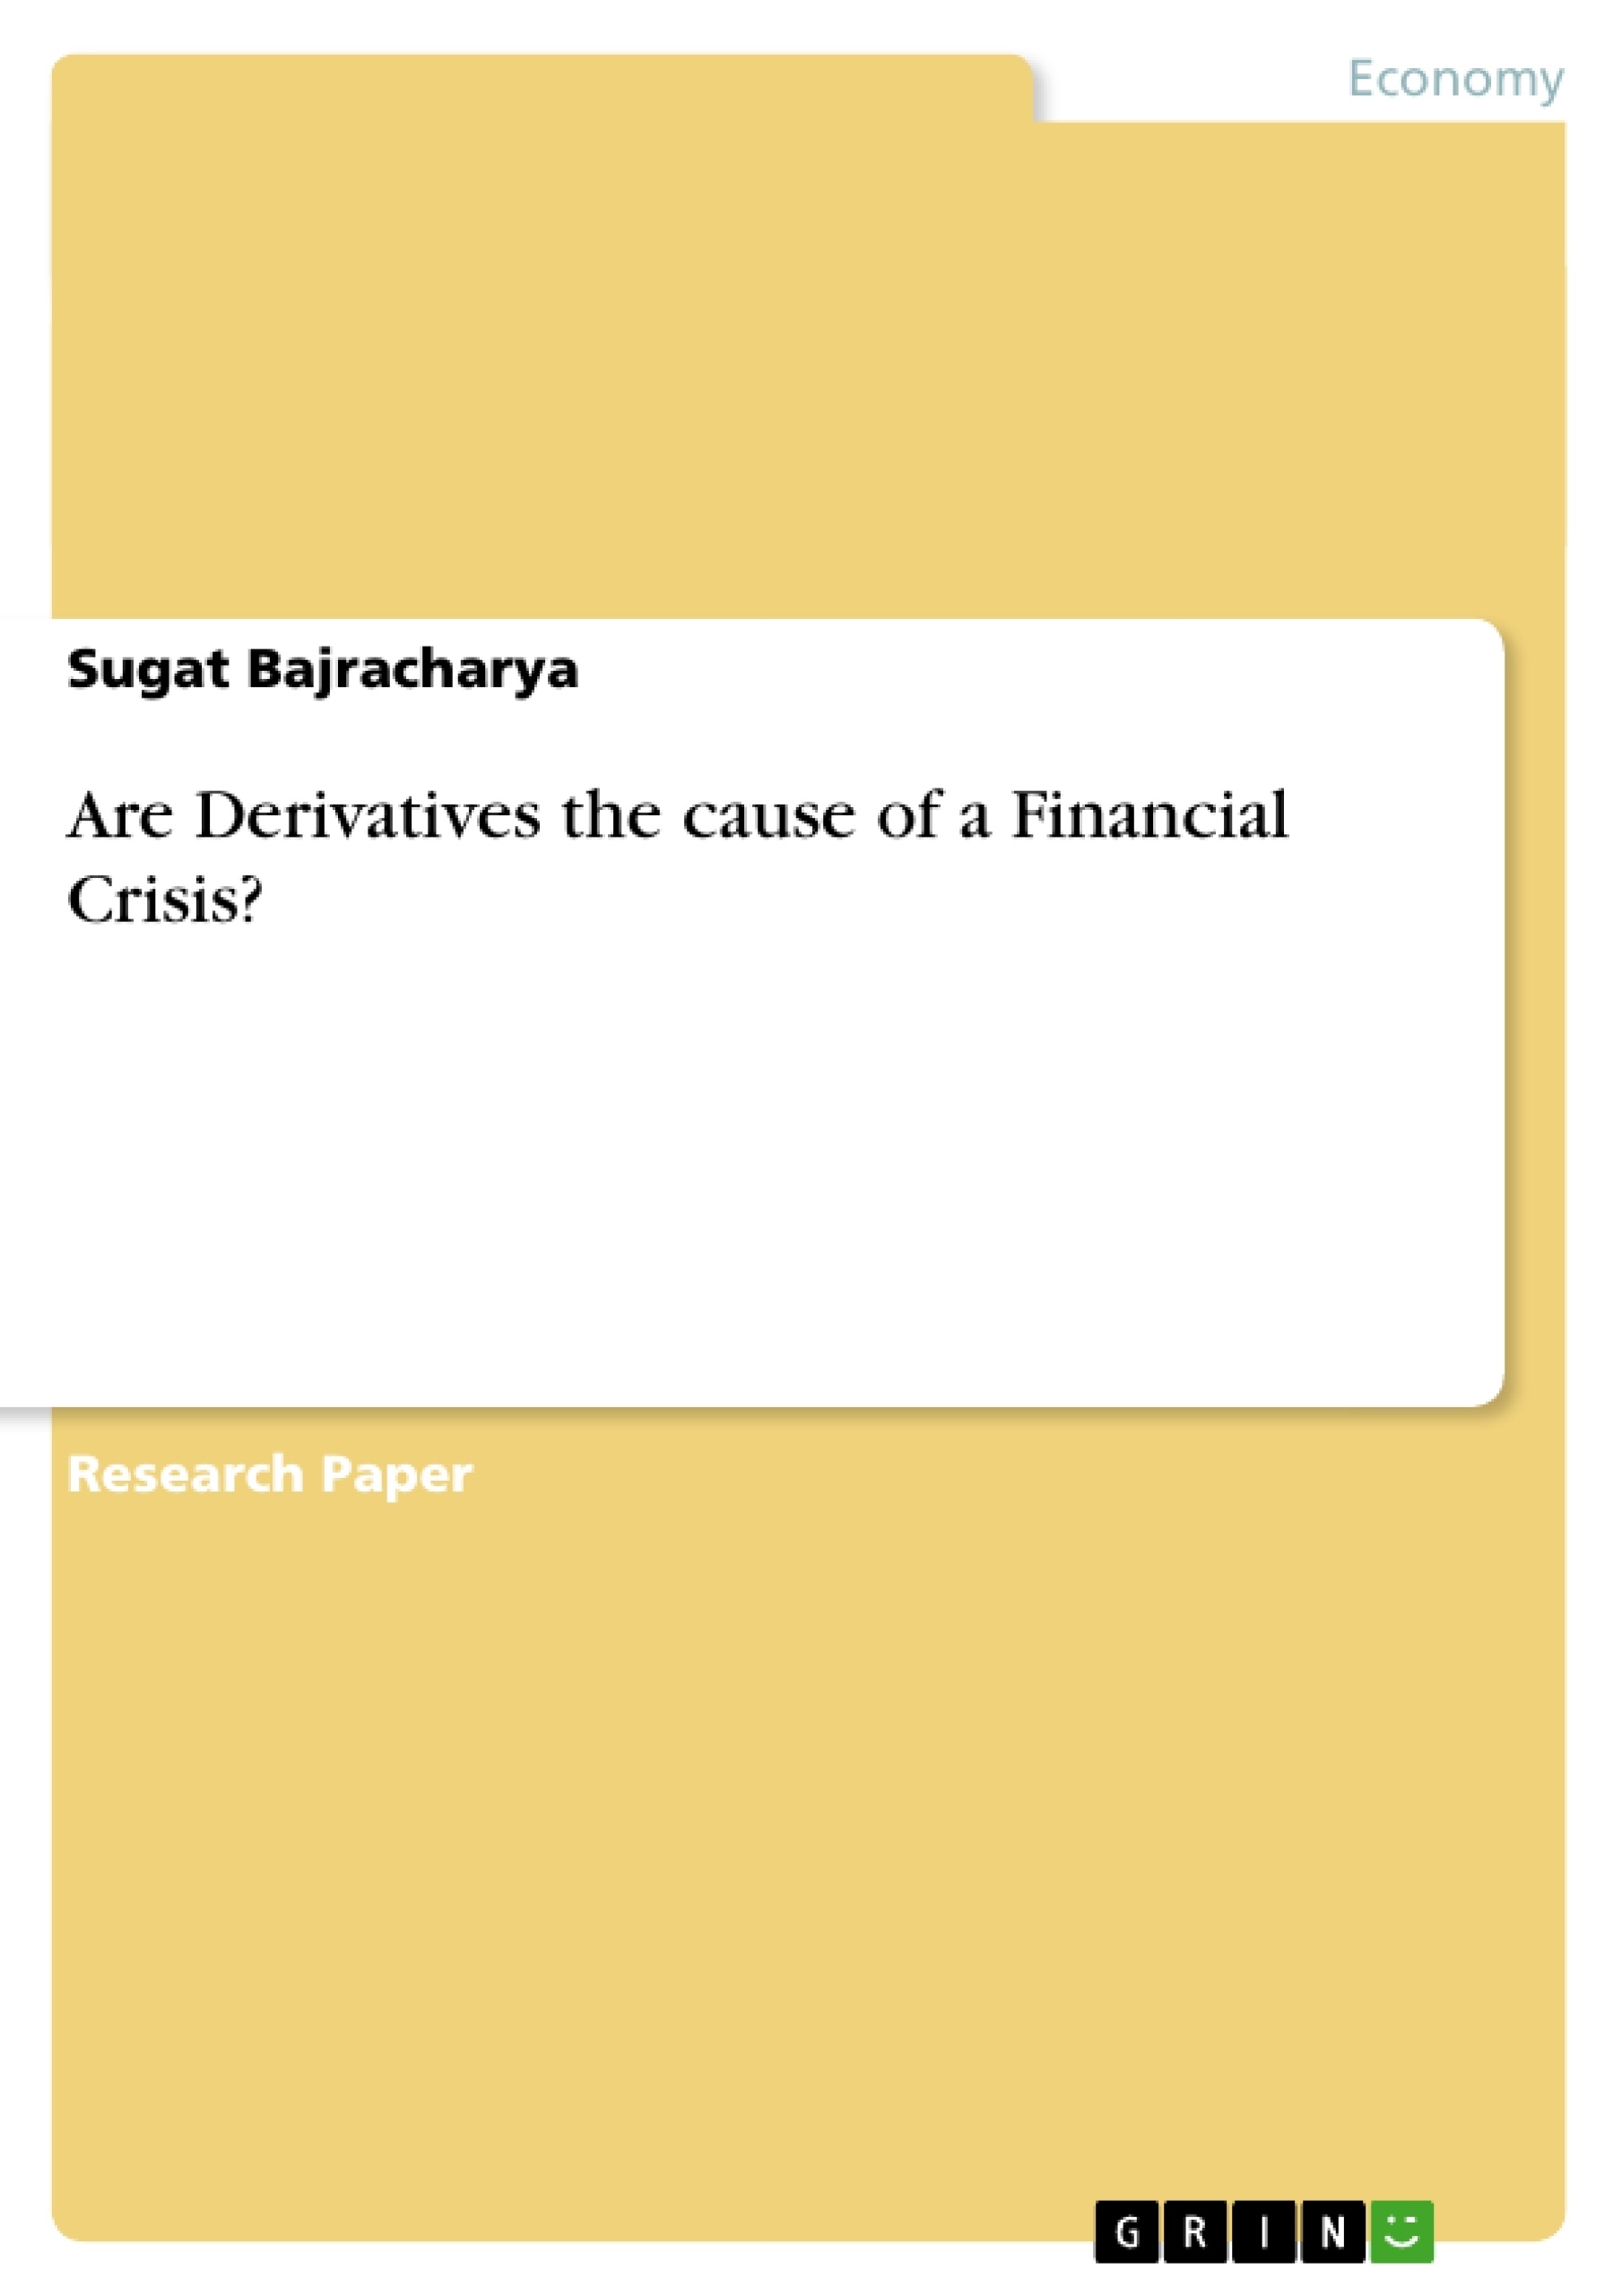 Title: Are Derivatives the cause of a Financial Crisis?